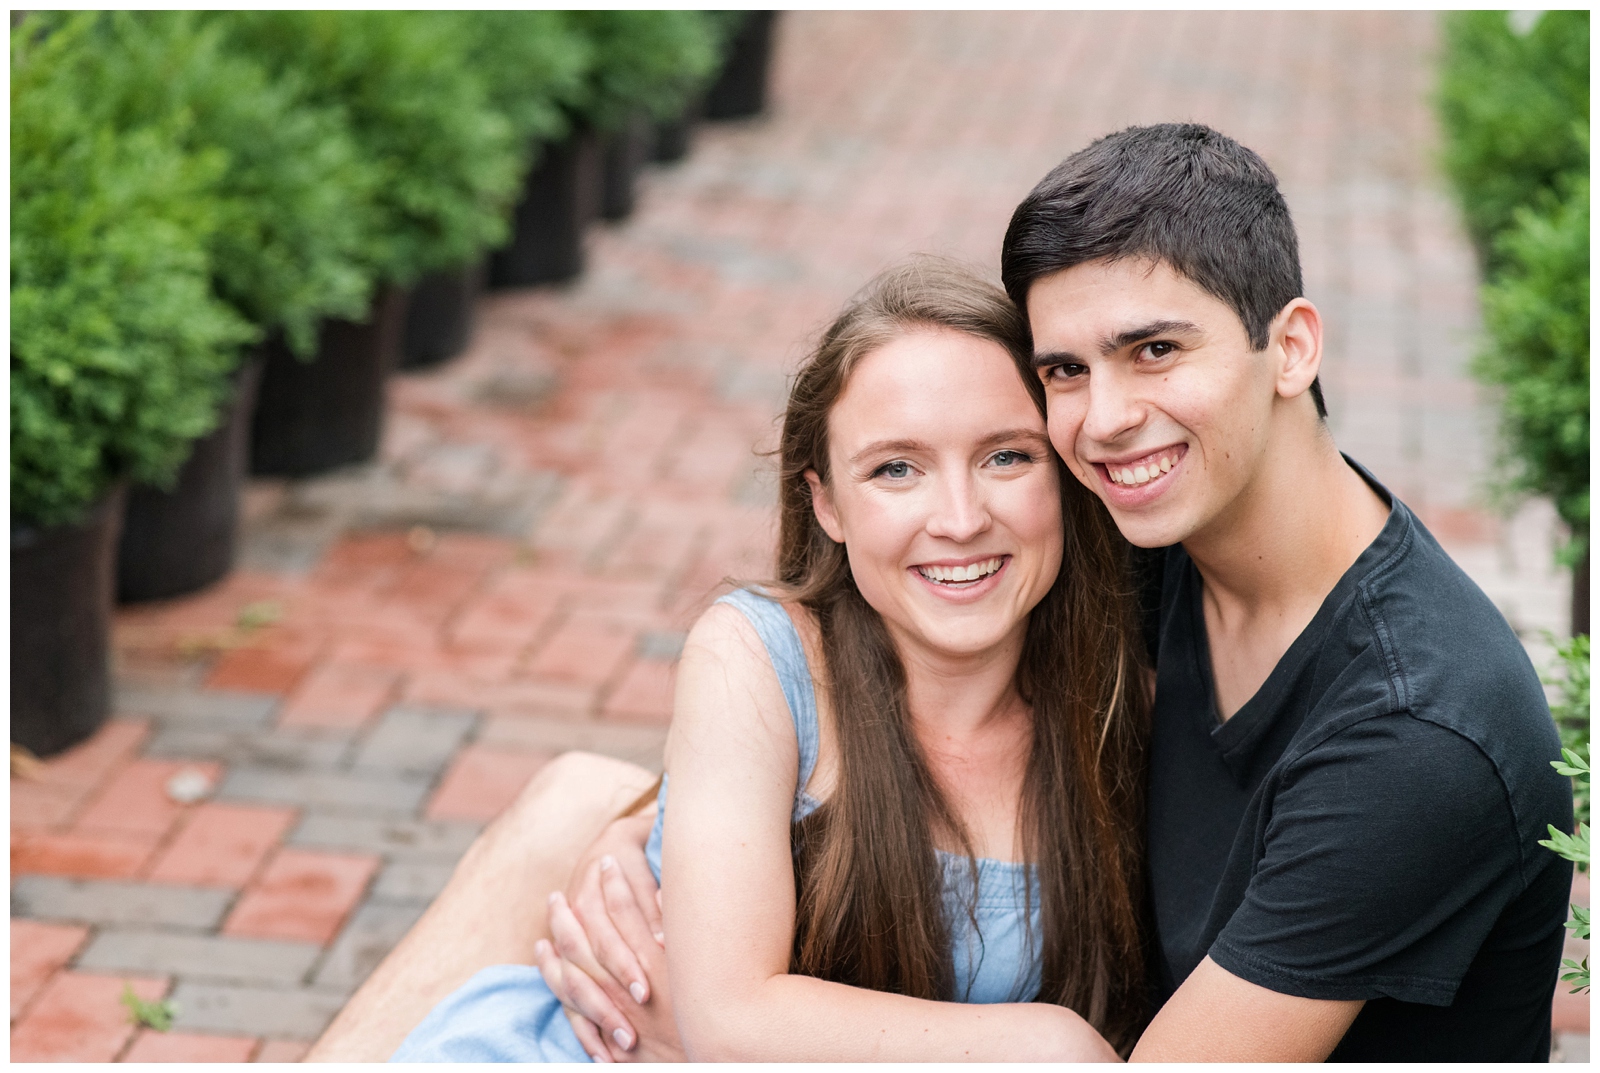 engaged couple sits on brick walkway with green plants around them during greenhouse inspired engagement session